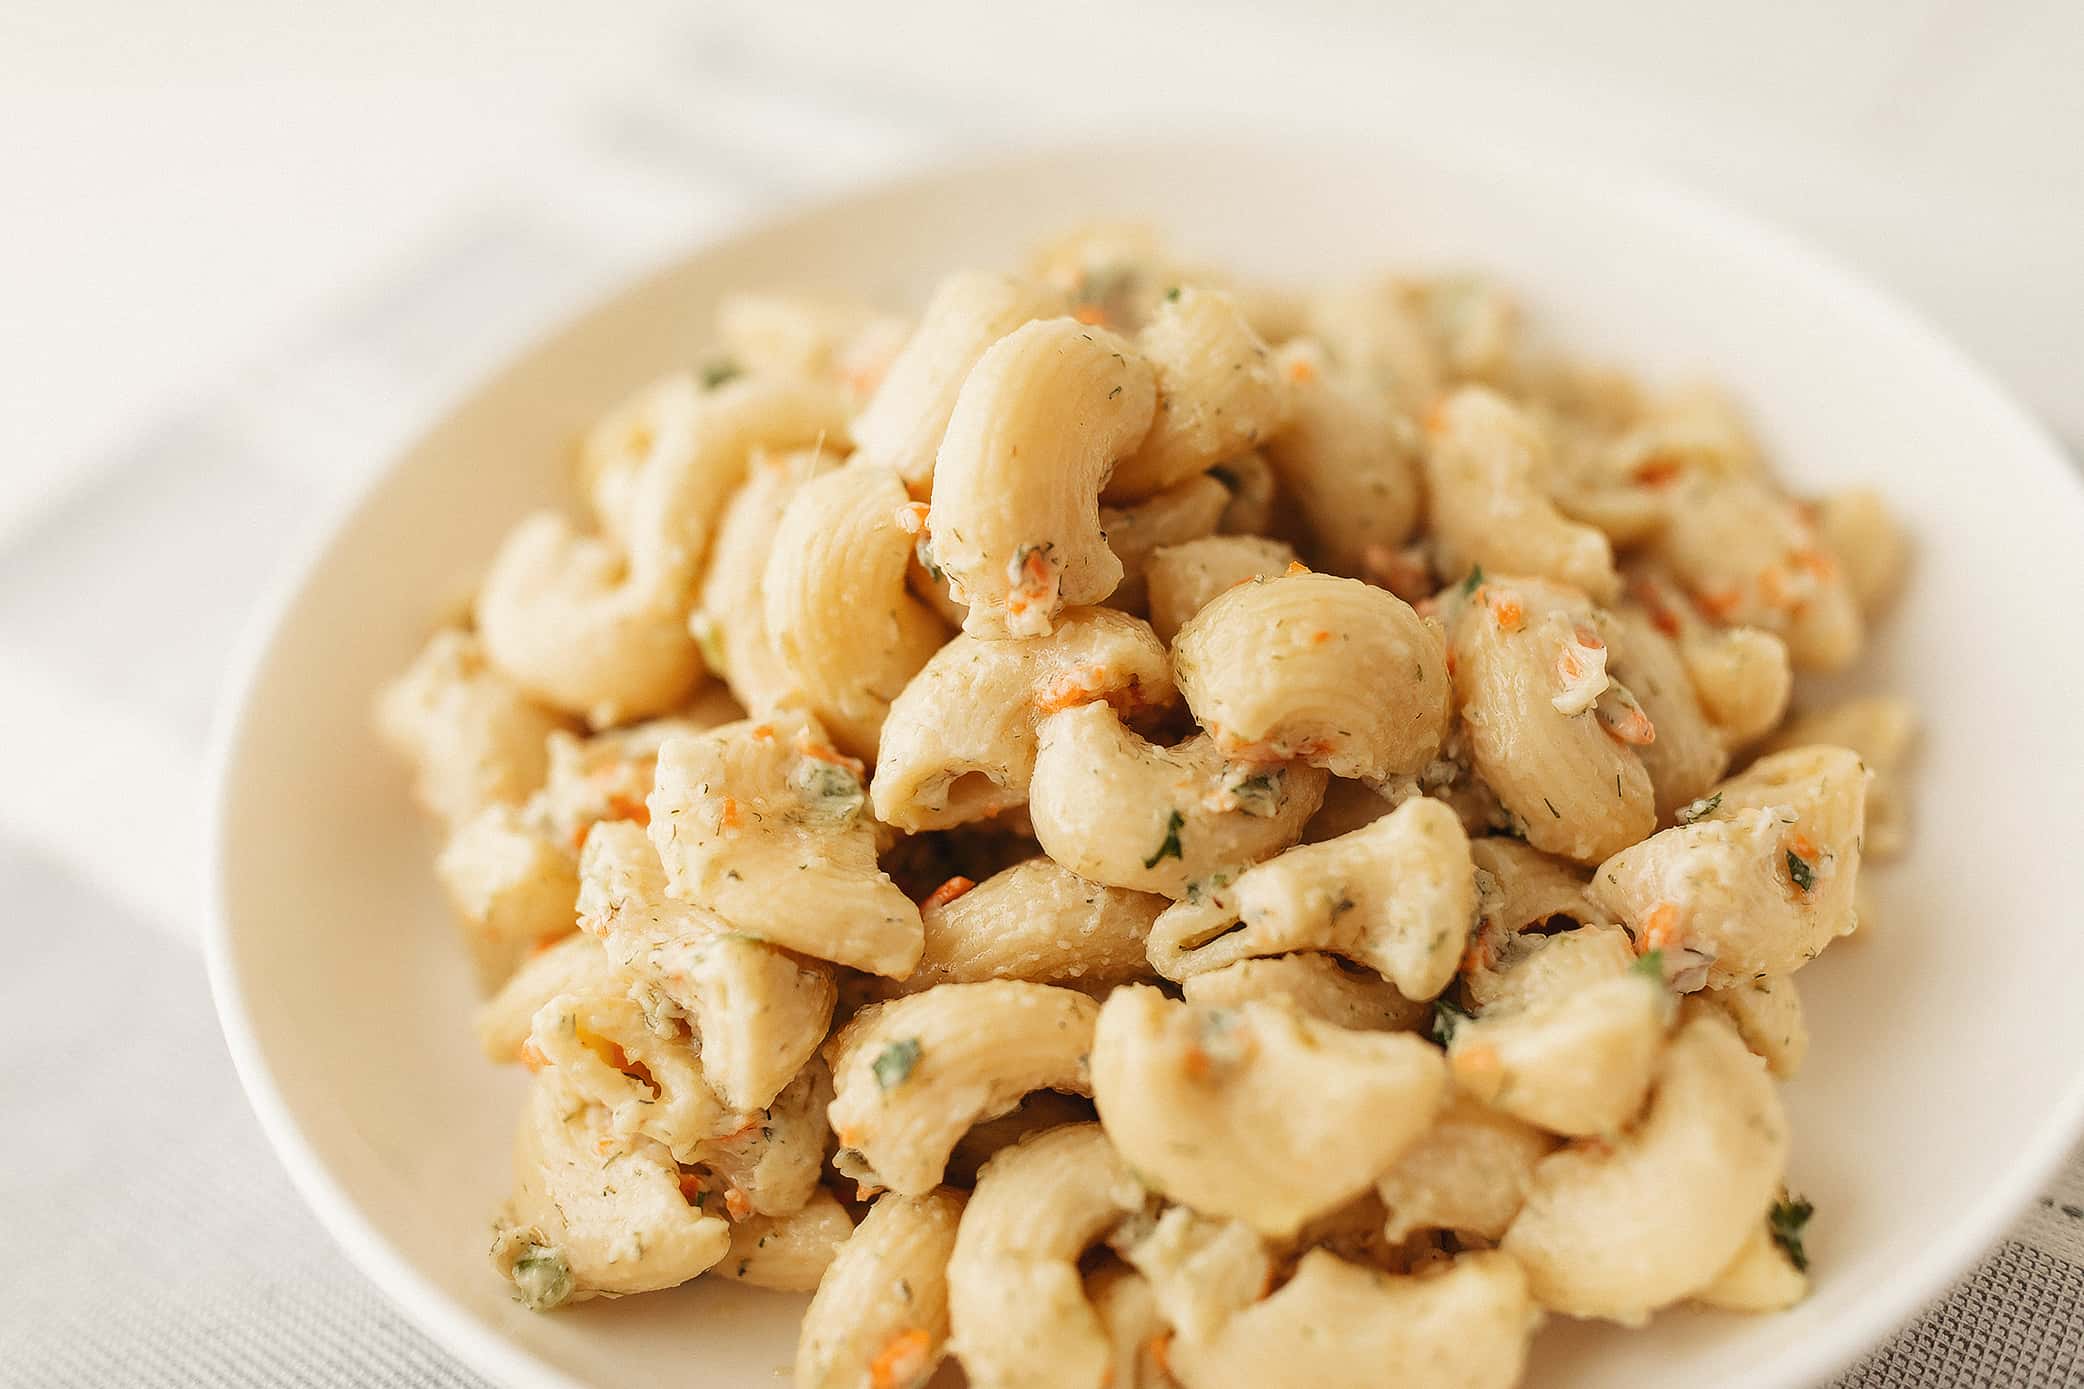 APM Macaroni Salad. Made by our chefs with all natural fresh ingredients.